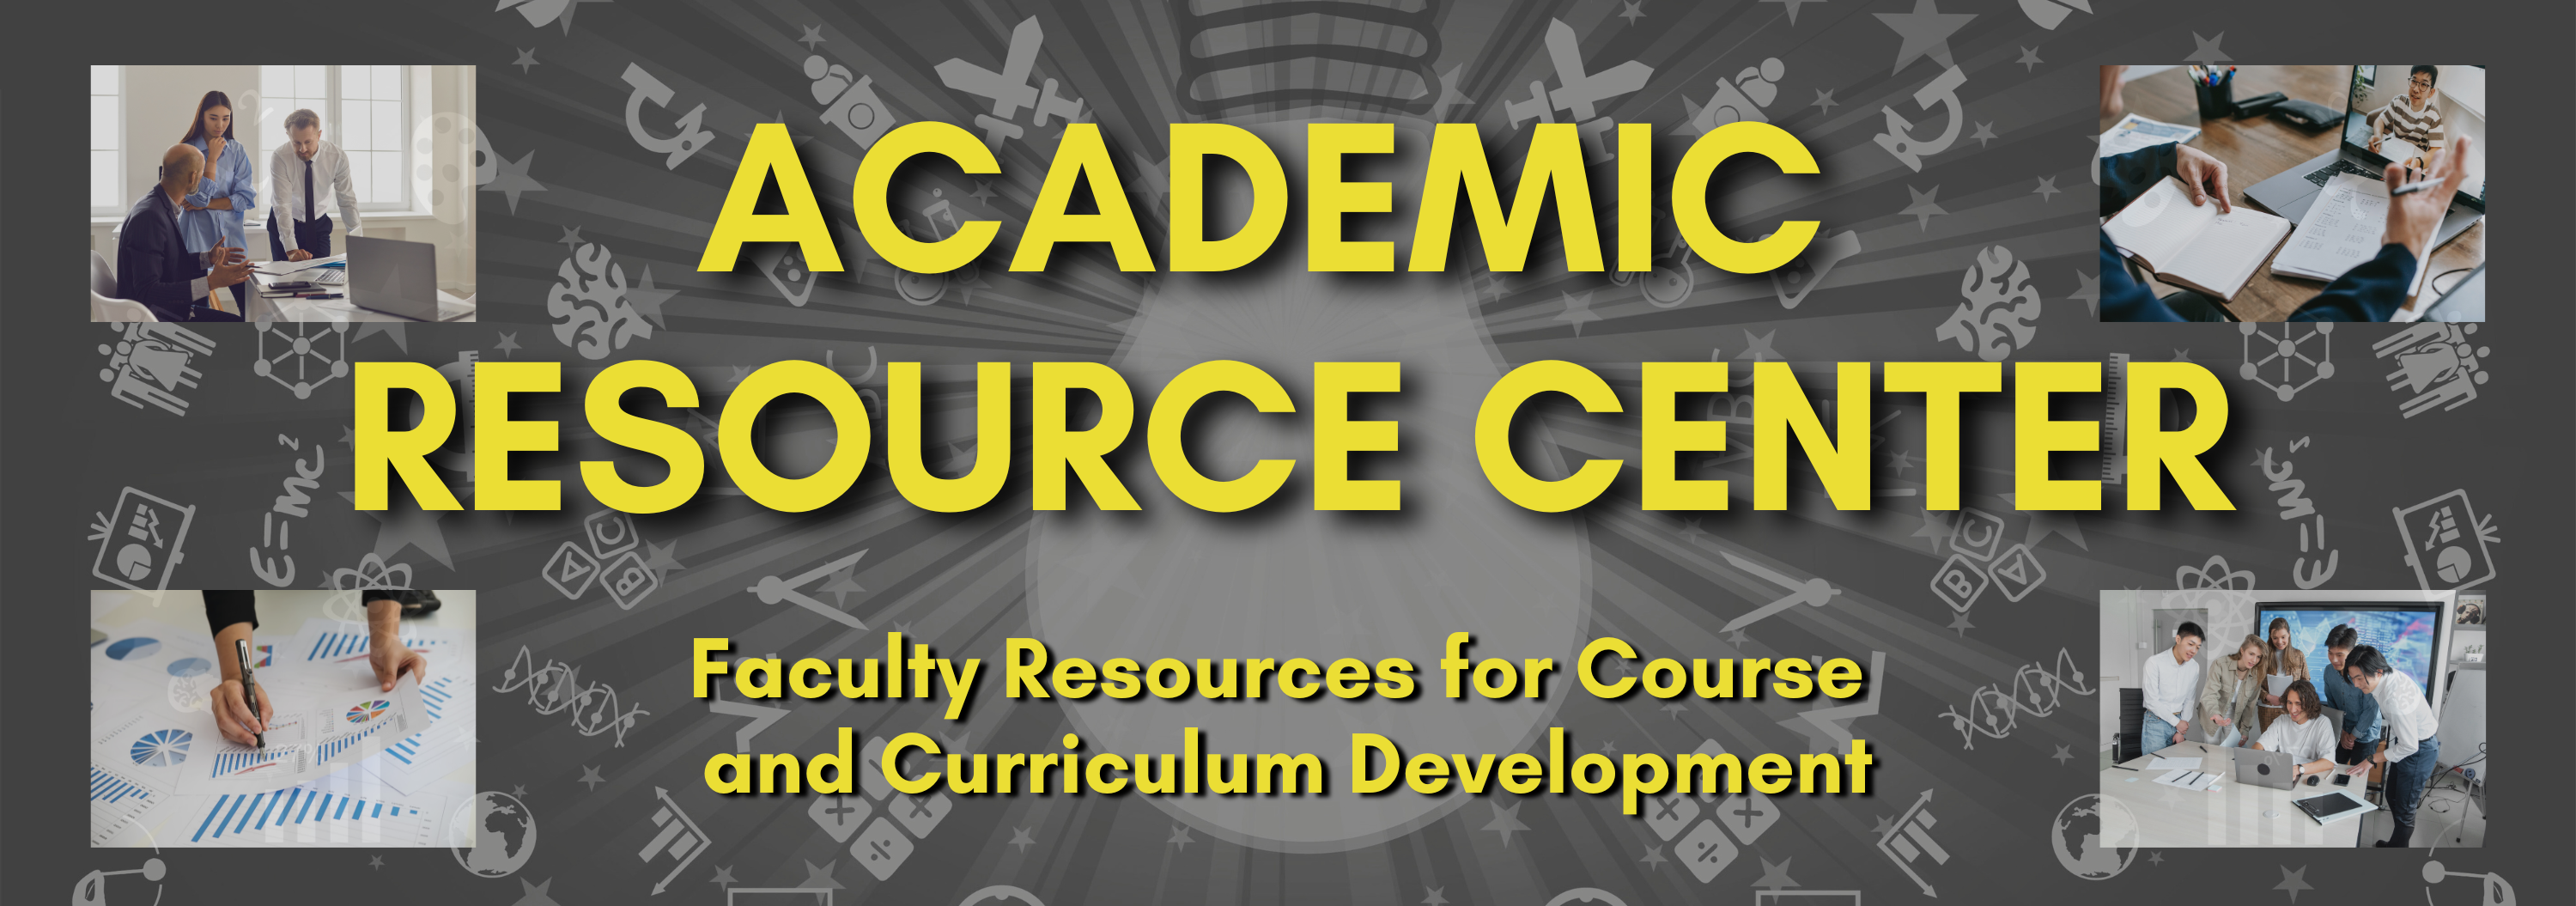 Academic Resource Center for Faculty